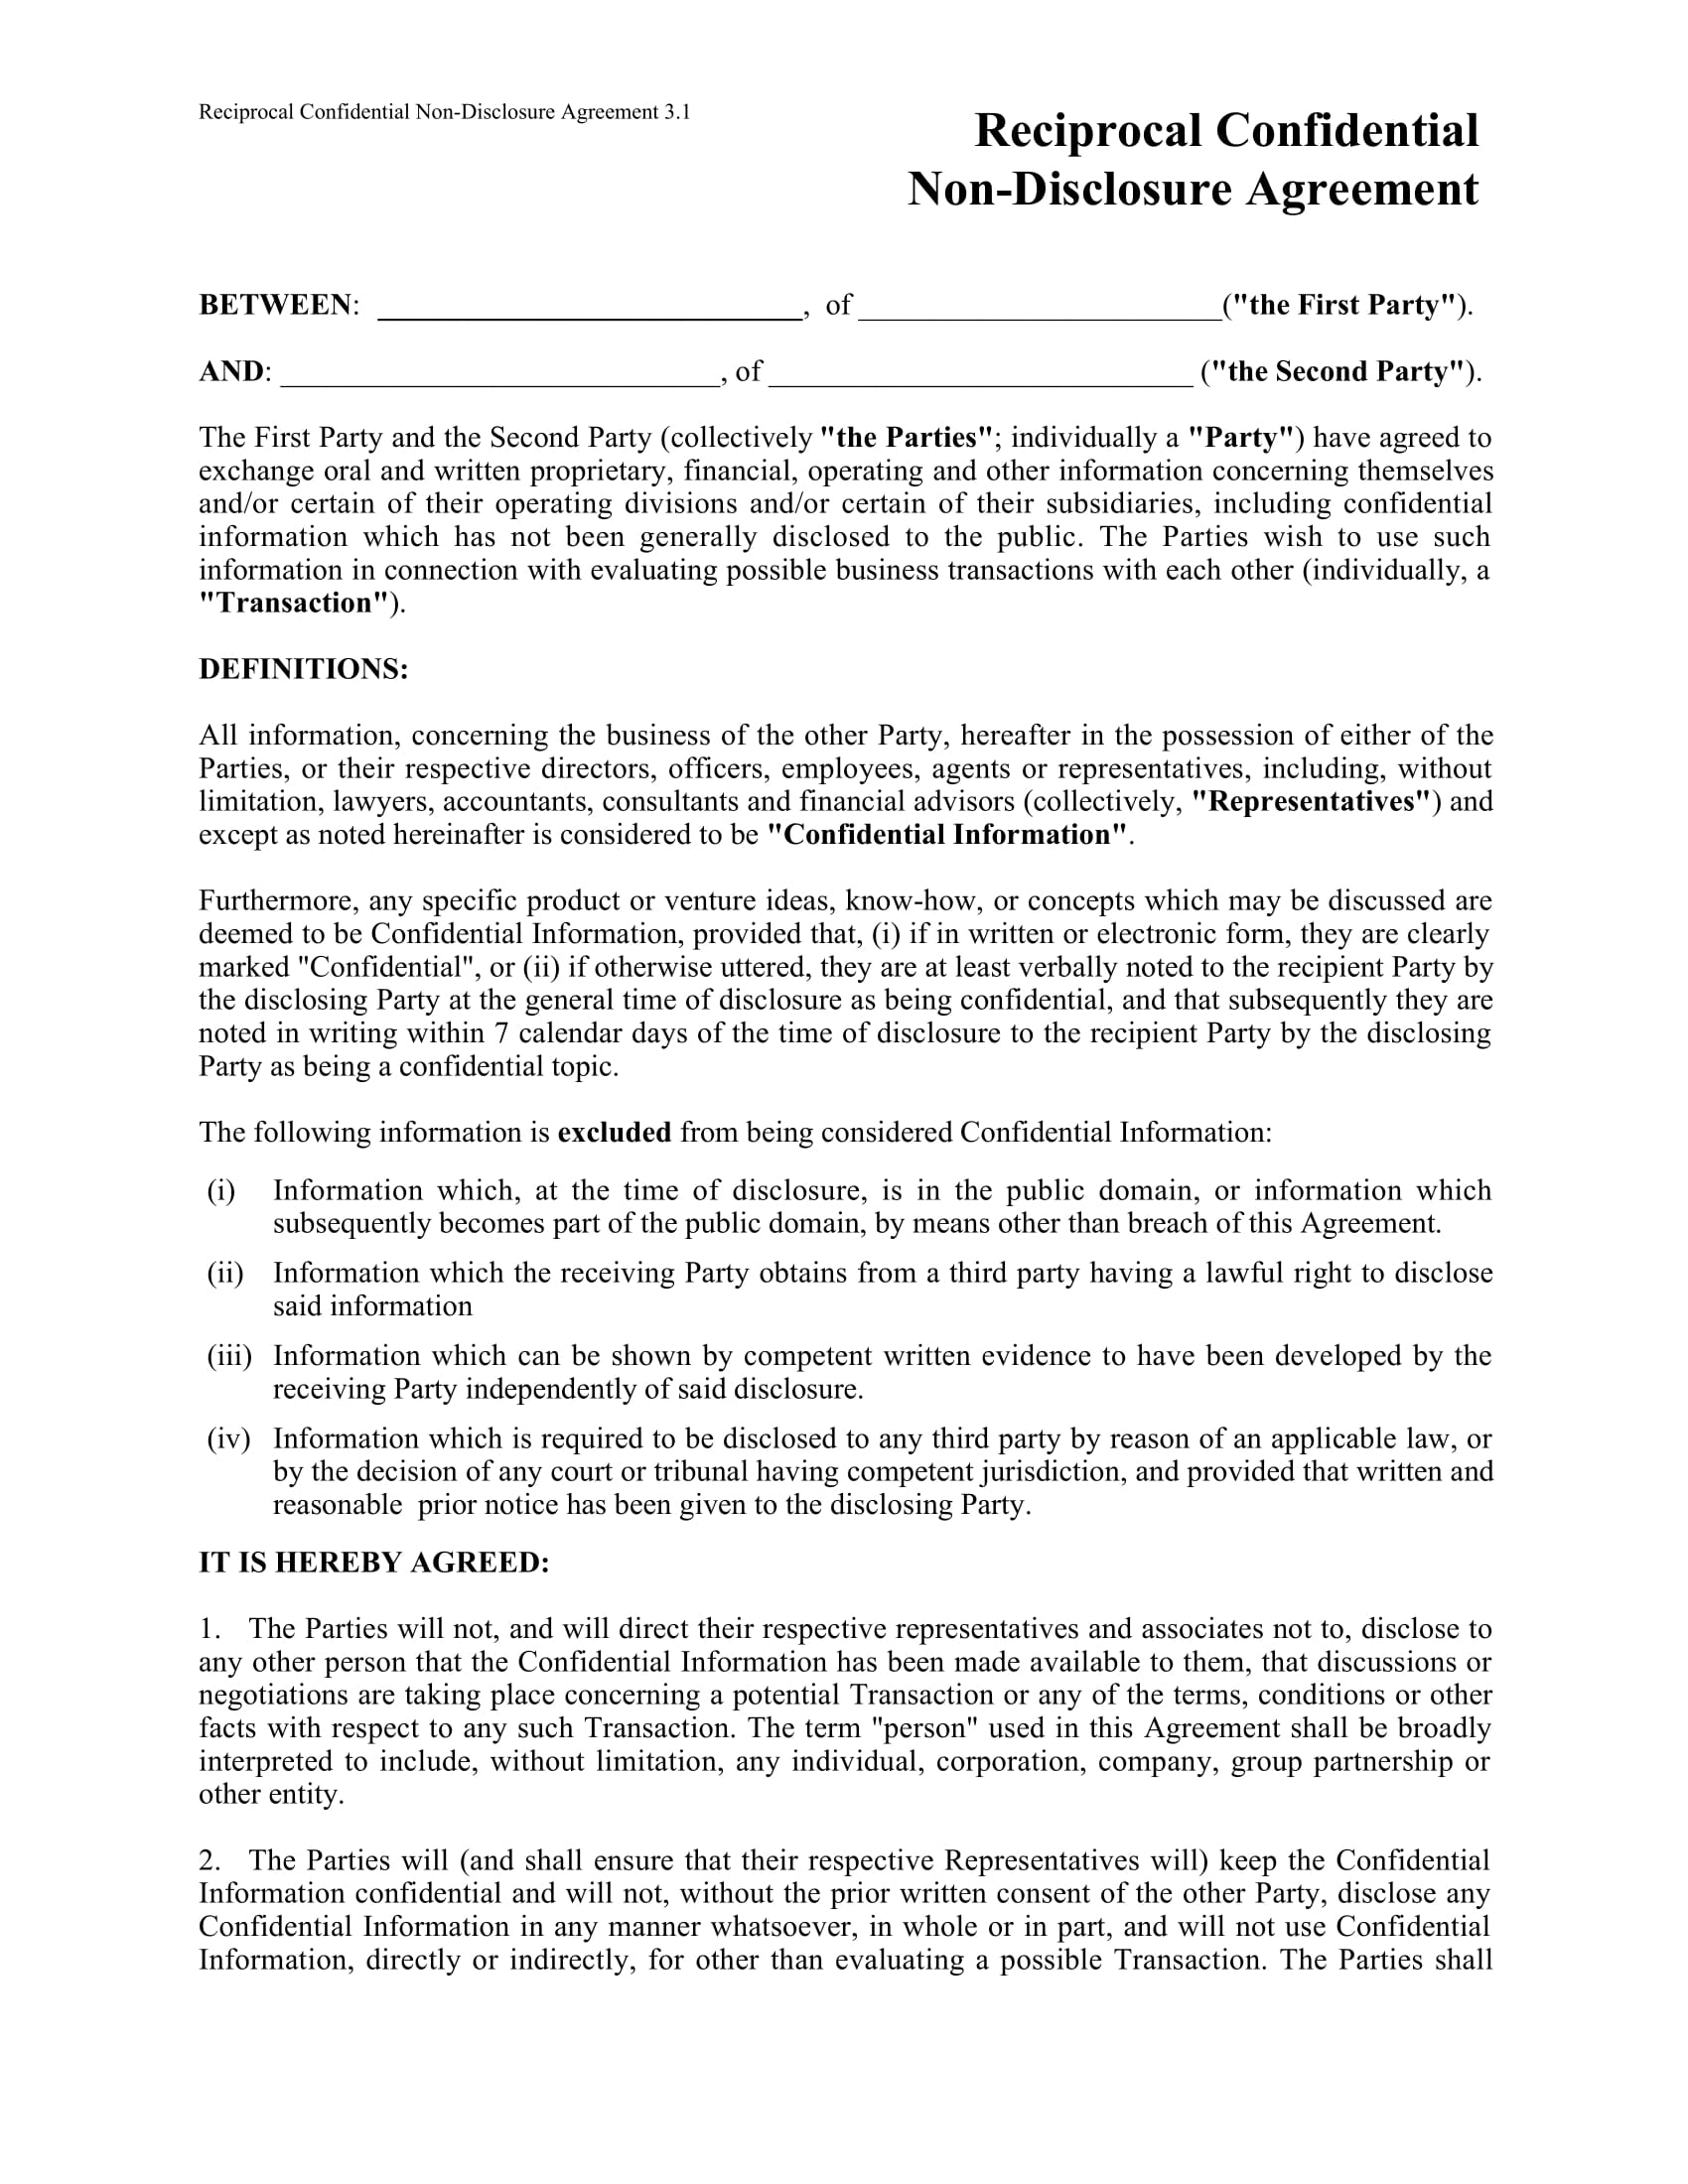 reciprocal confidentiality agreement form sample 1